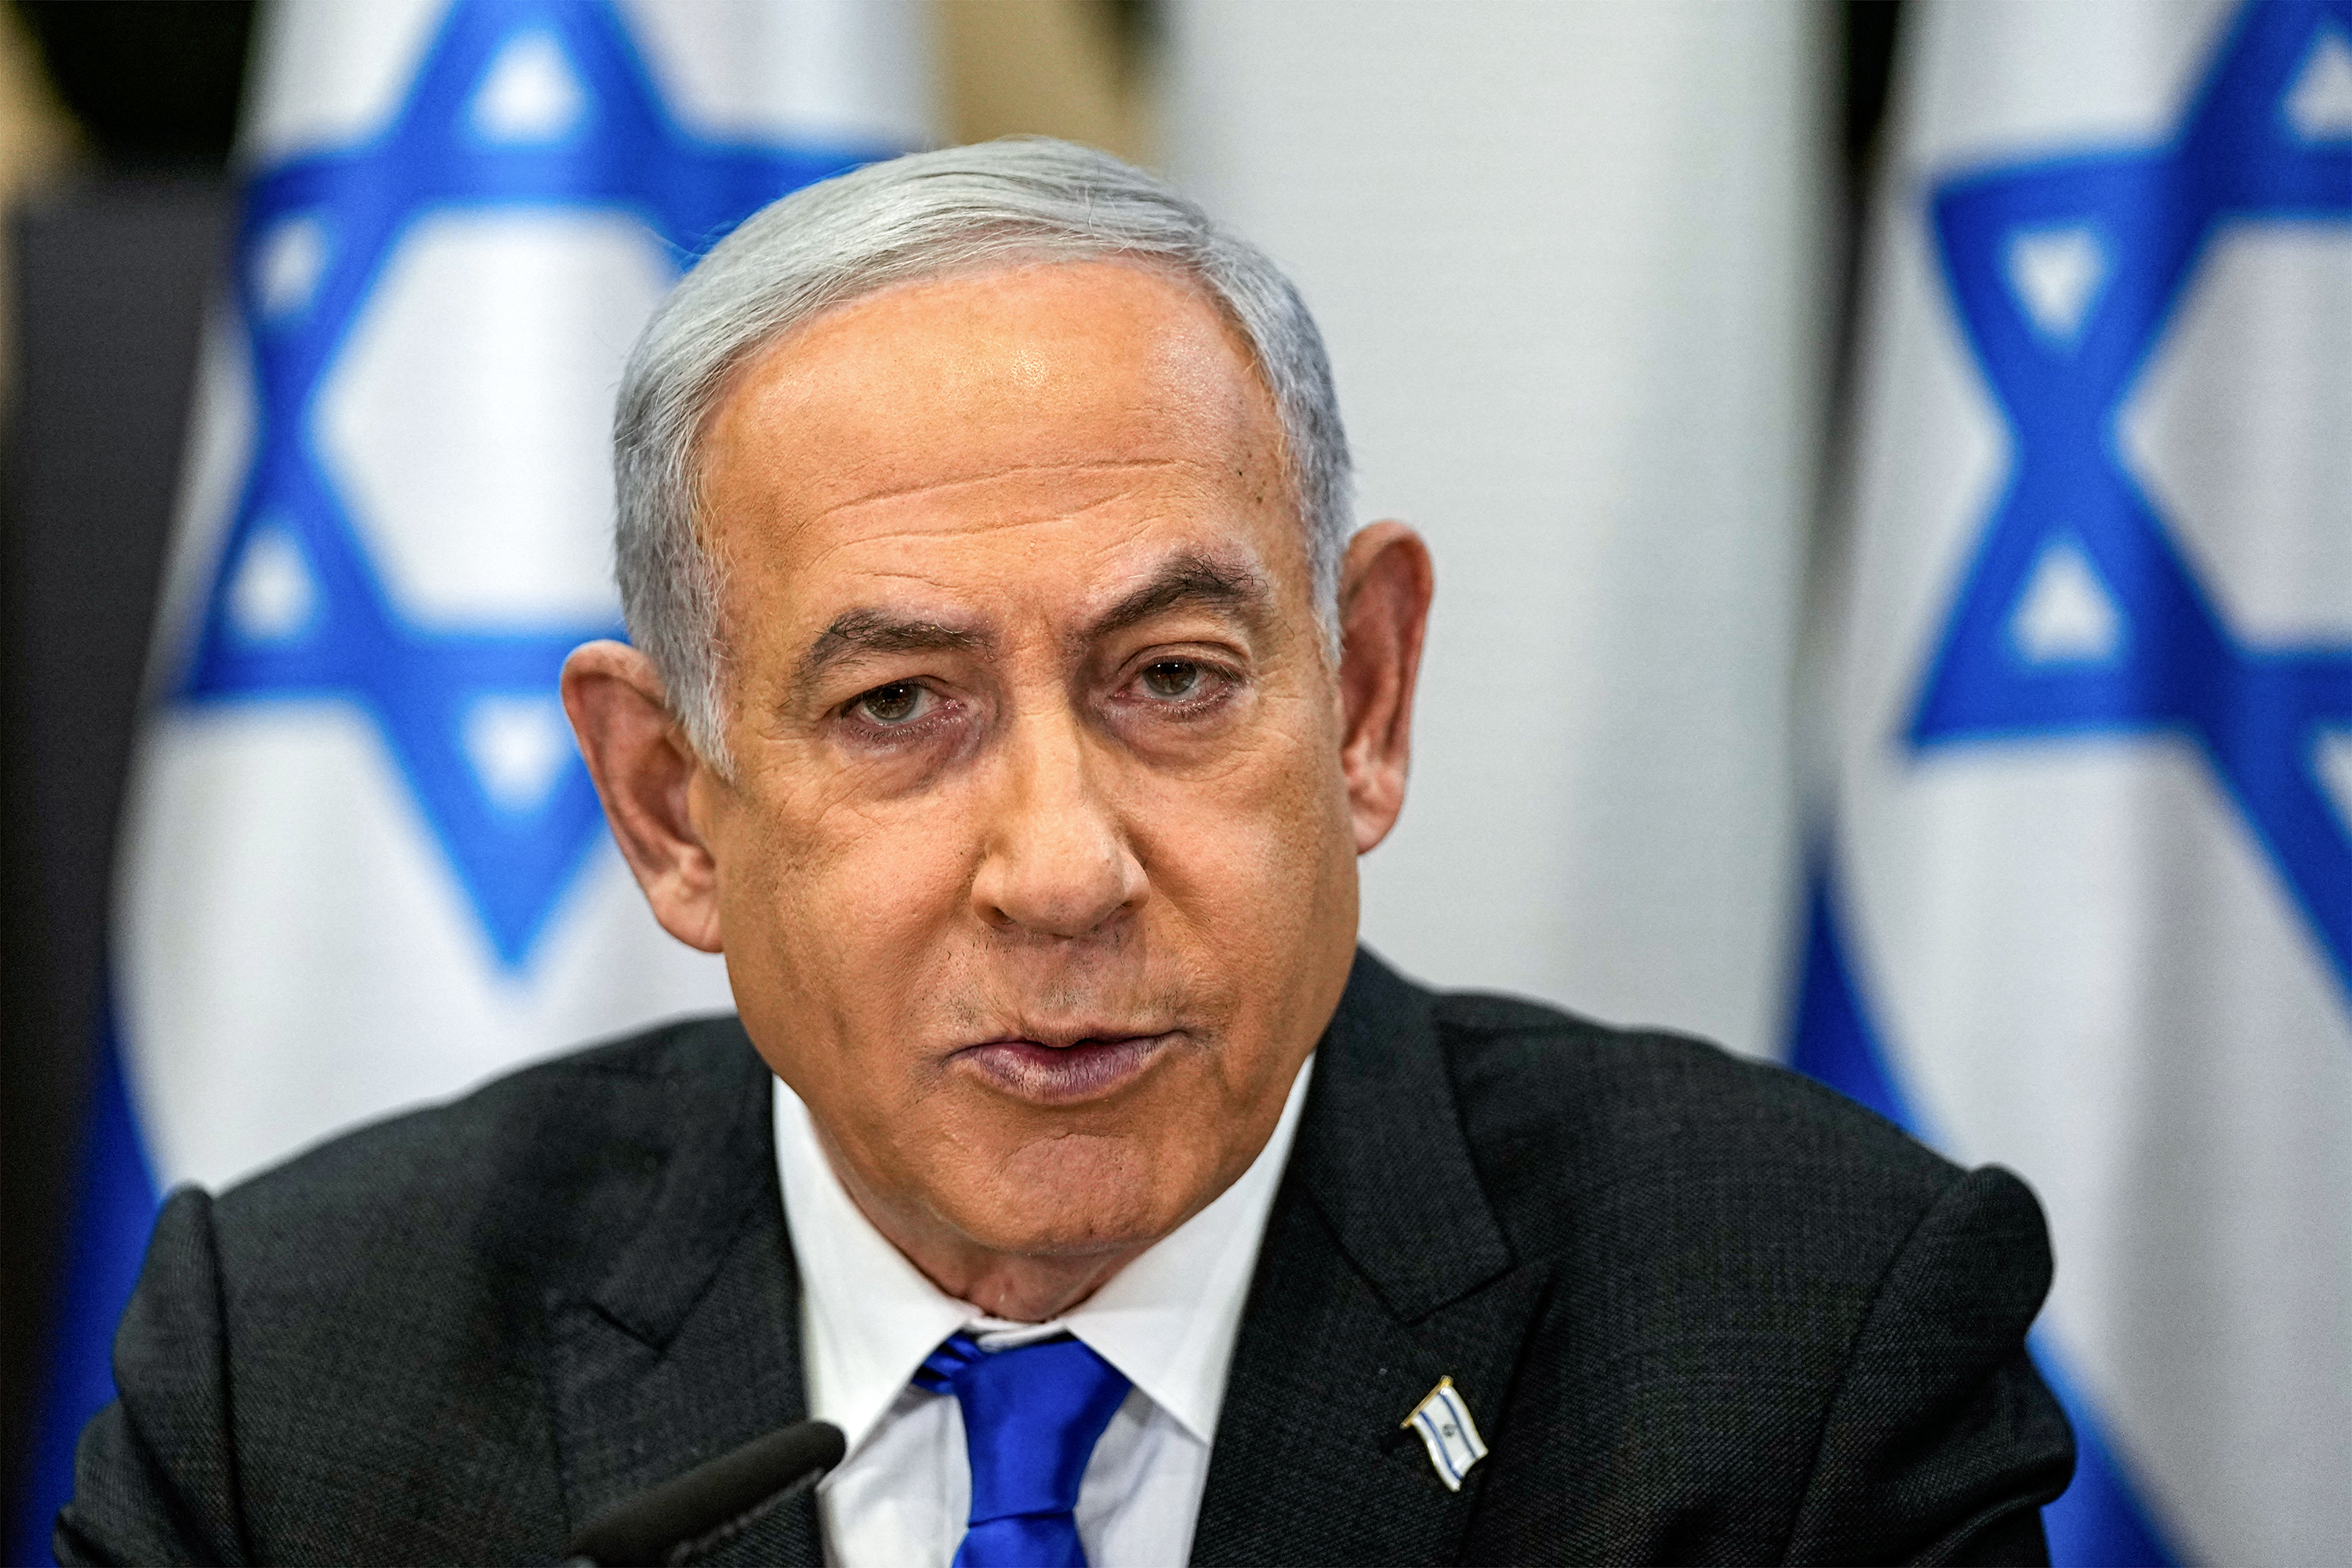 Israeli Prime Minister Benjamin Netanyahu chairs a cabinet meeting at the Kirya military base, which houses the Israeli Ministry of Defence, in Tel Aviv on December 24.